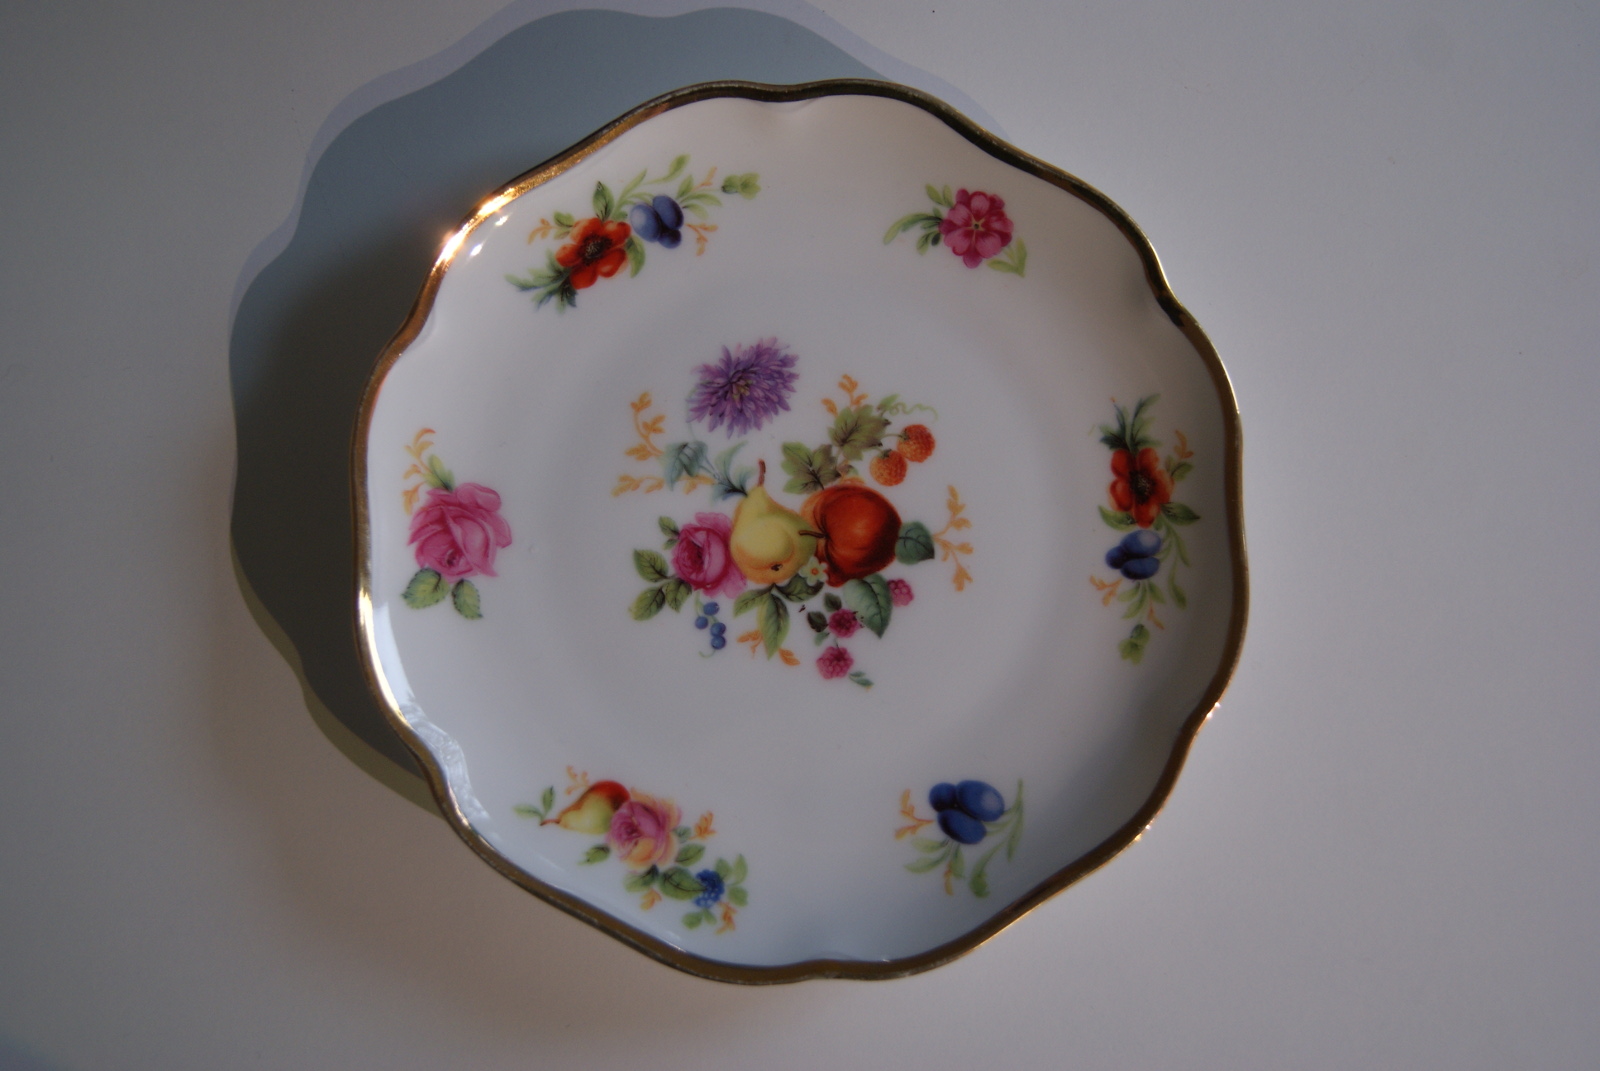 Waldenburg plate with fruits and flowers